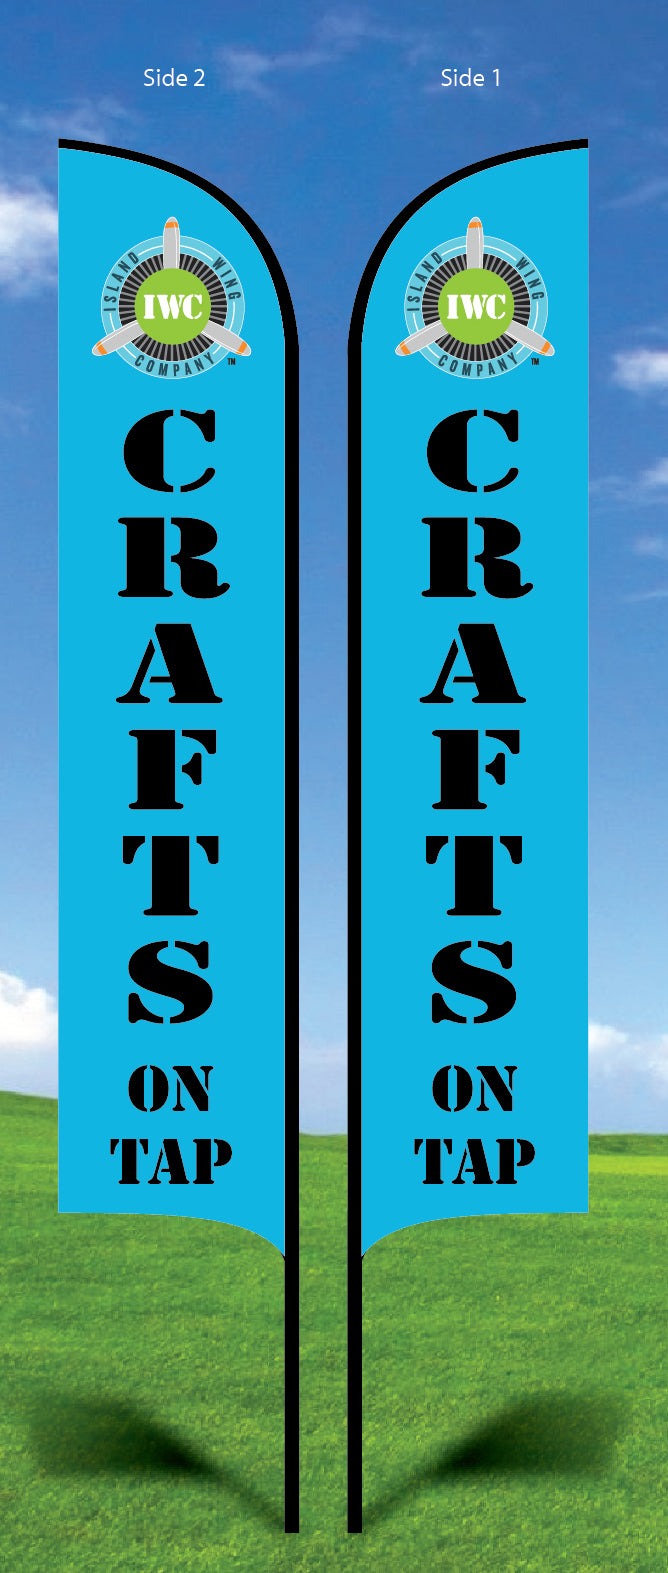 IWC Crafts On Tap Promo Flag